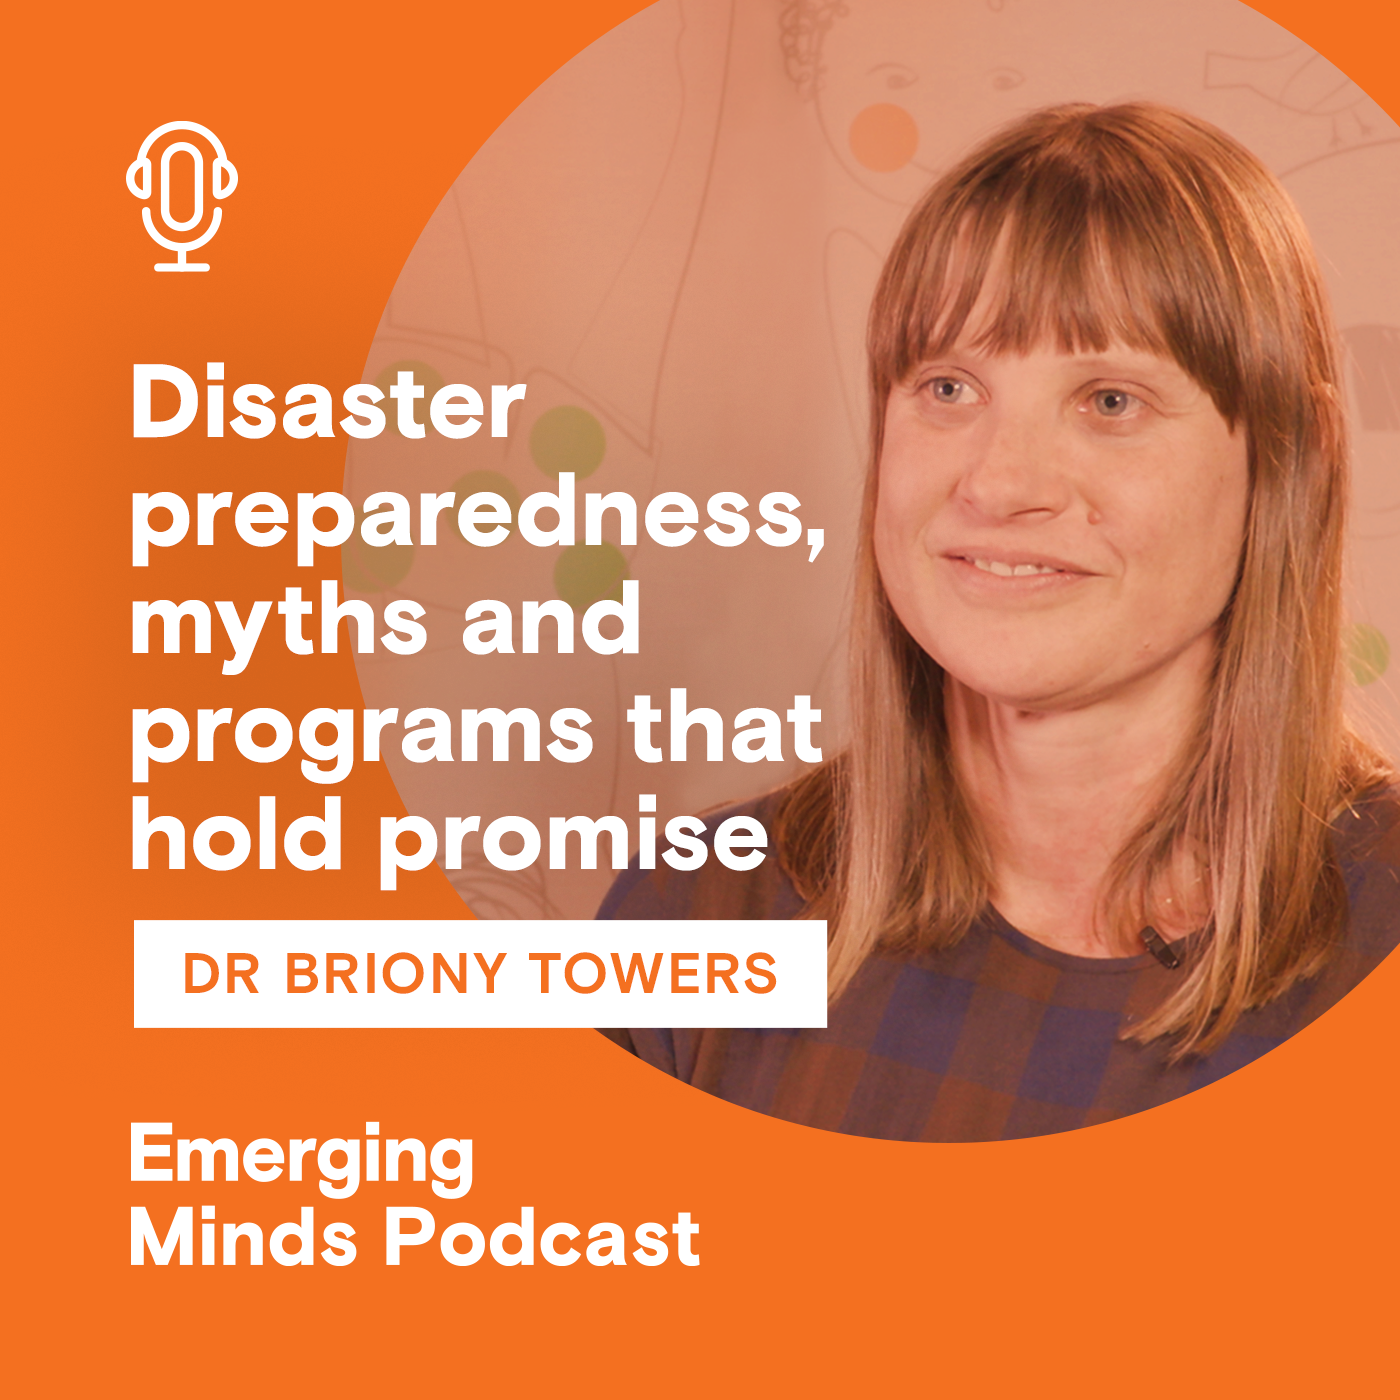 Re-release - Disaster preparedness, myths and programs that hold promise